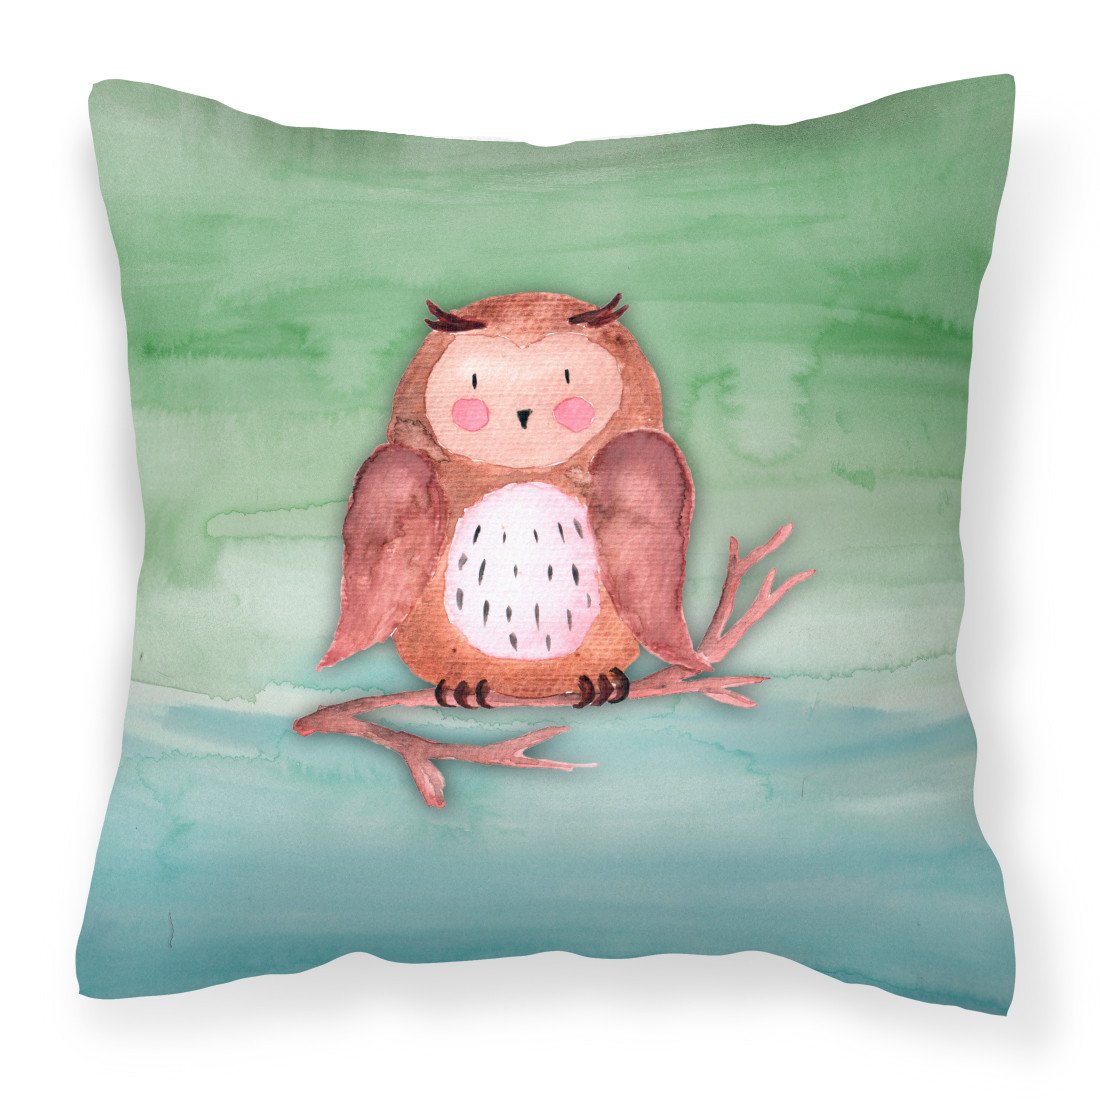 Brown Owl Watercolor Fabric Decorative Pillow BB7443PW1818 by Caroline's Treasures